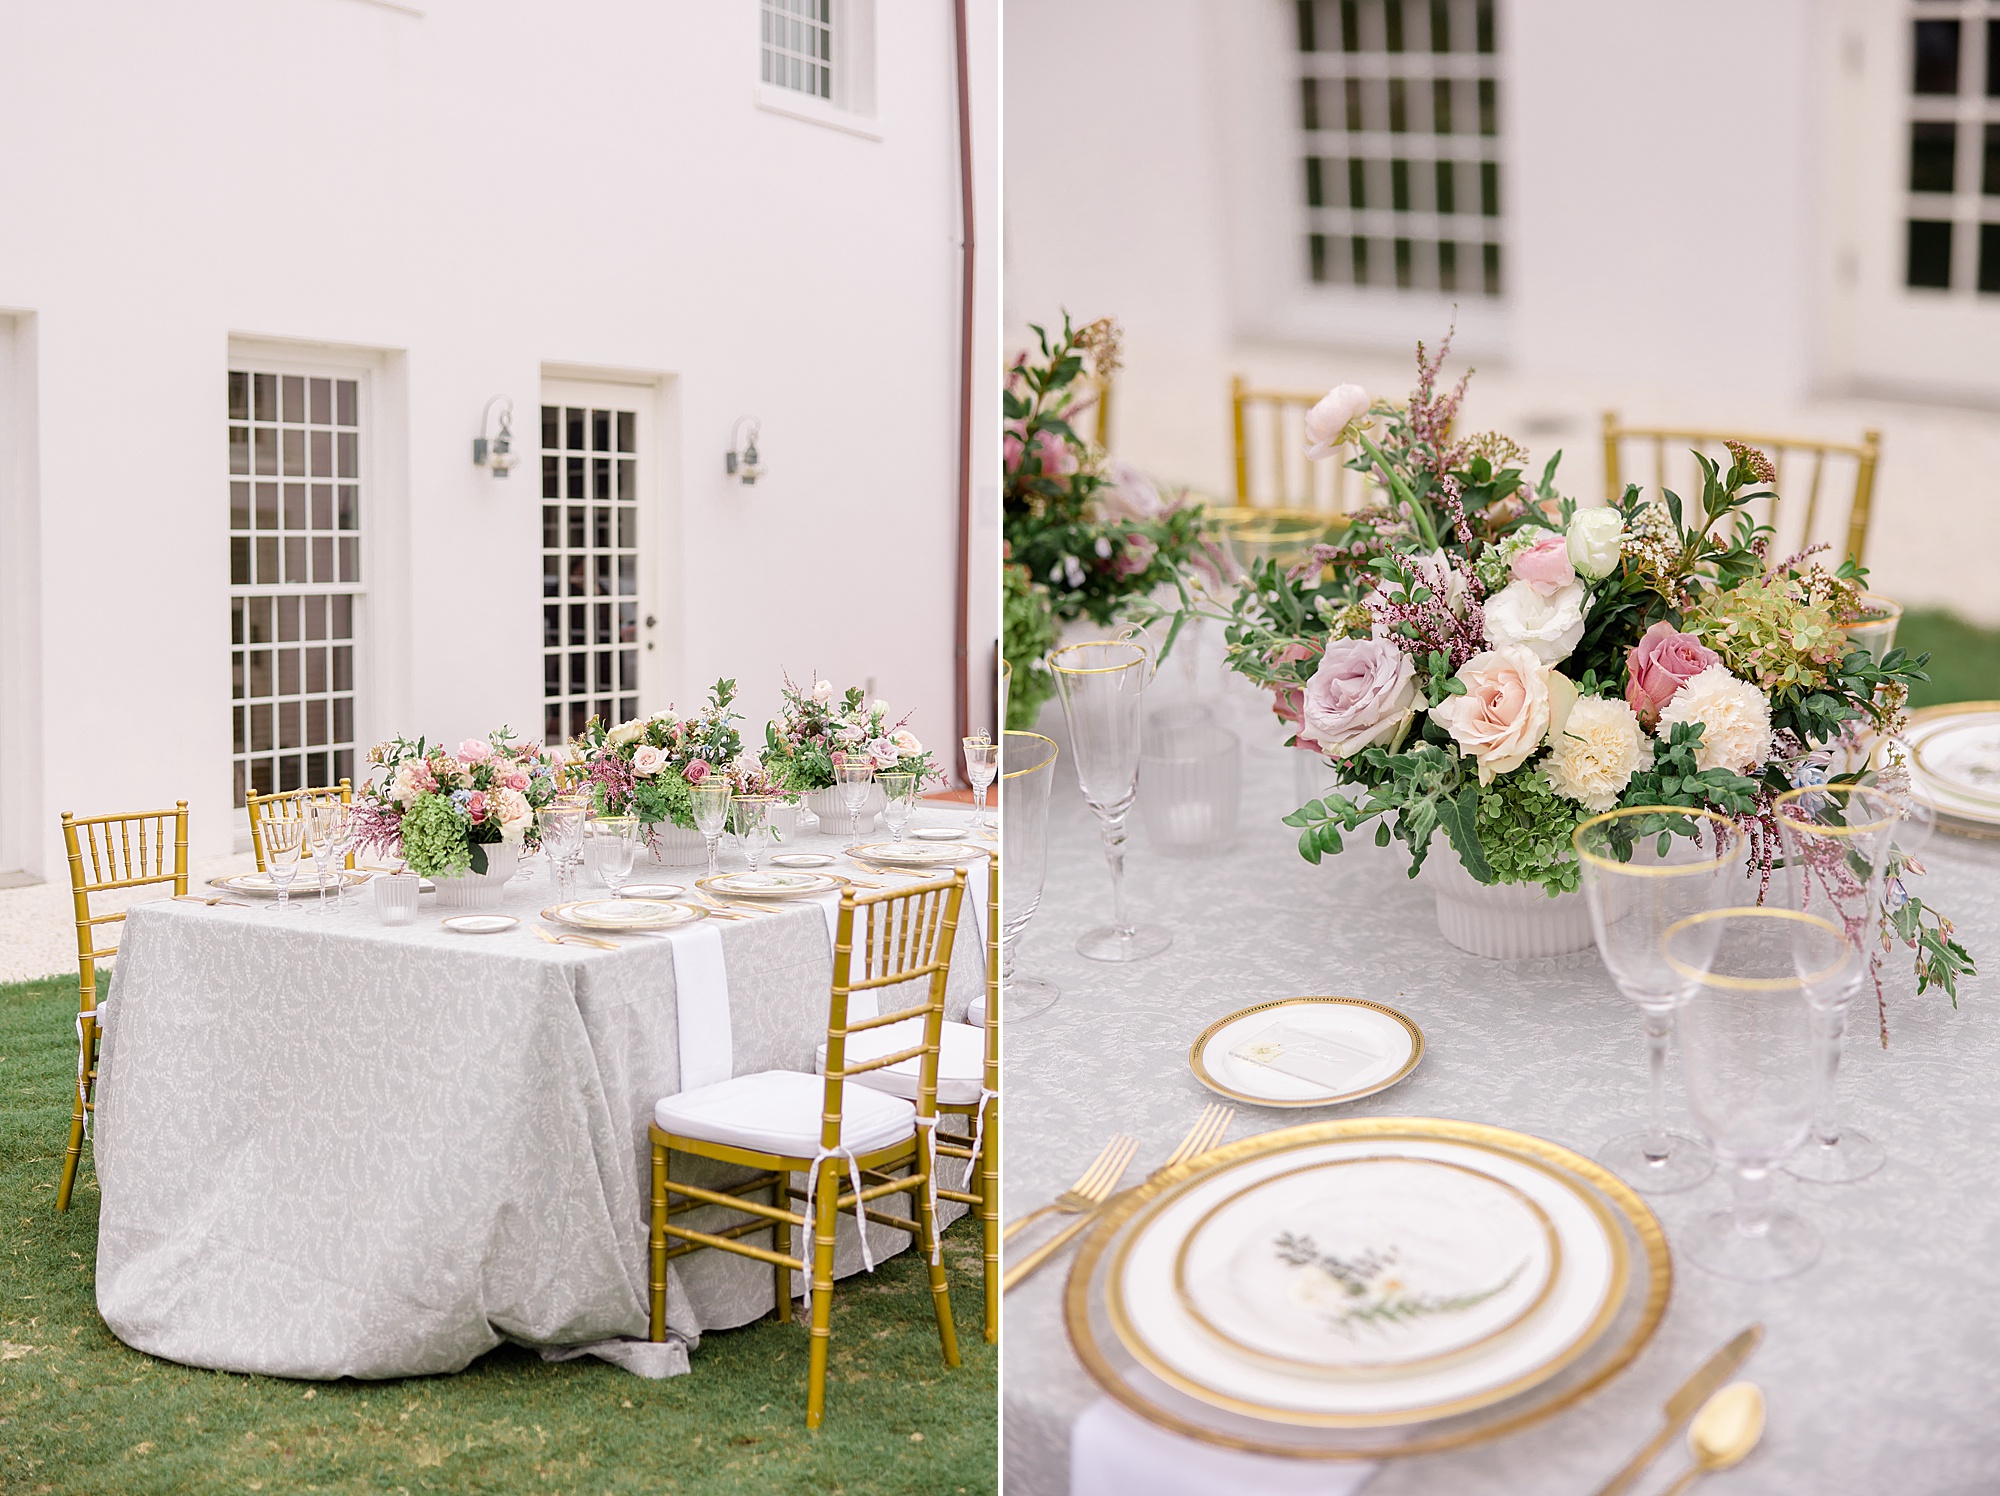 Rosemary Beach Town Hall Wedding reception details with gold and white place settings